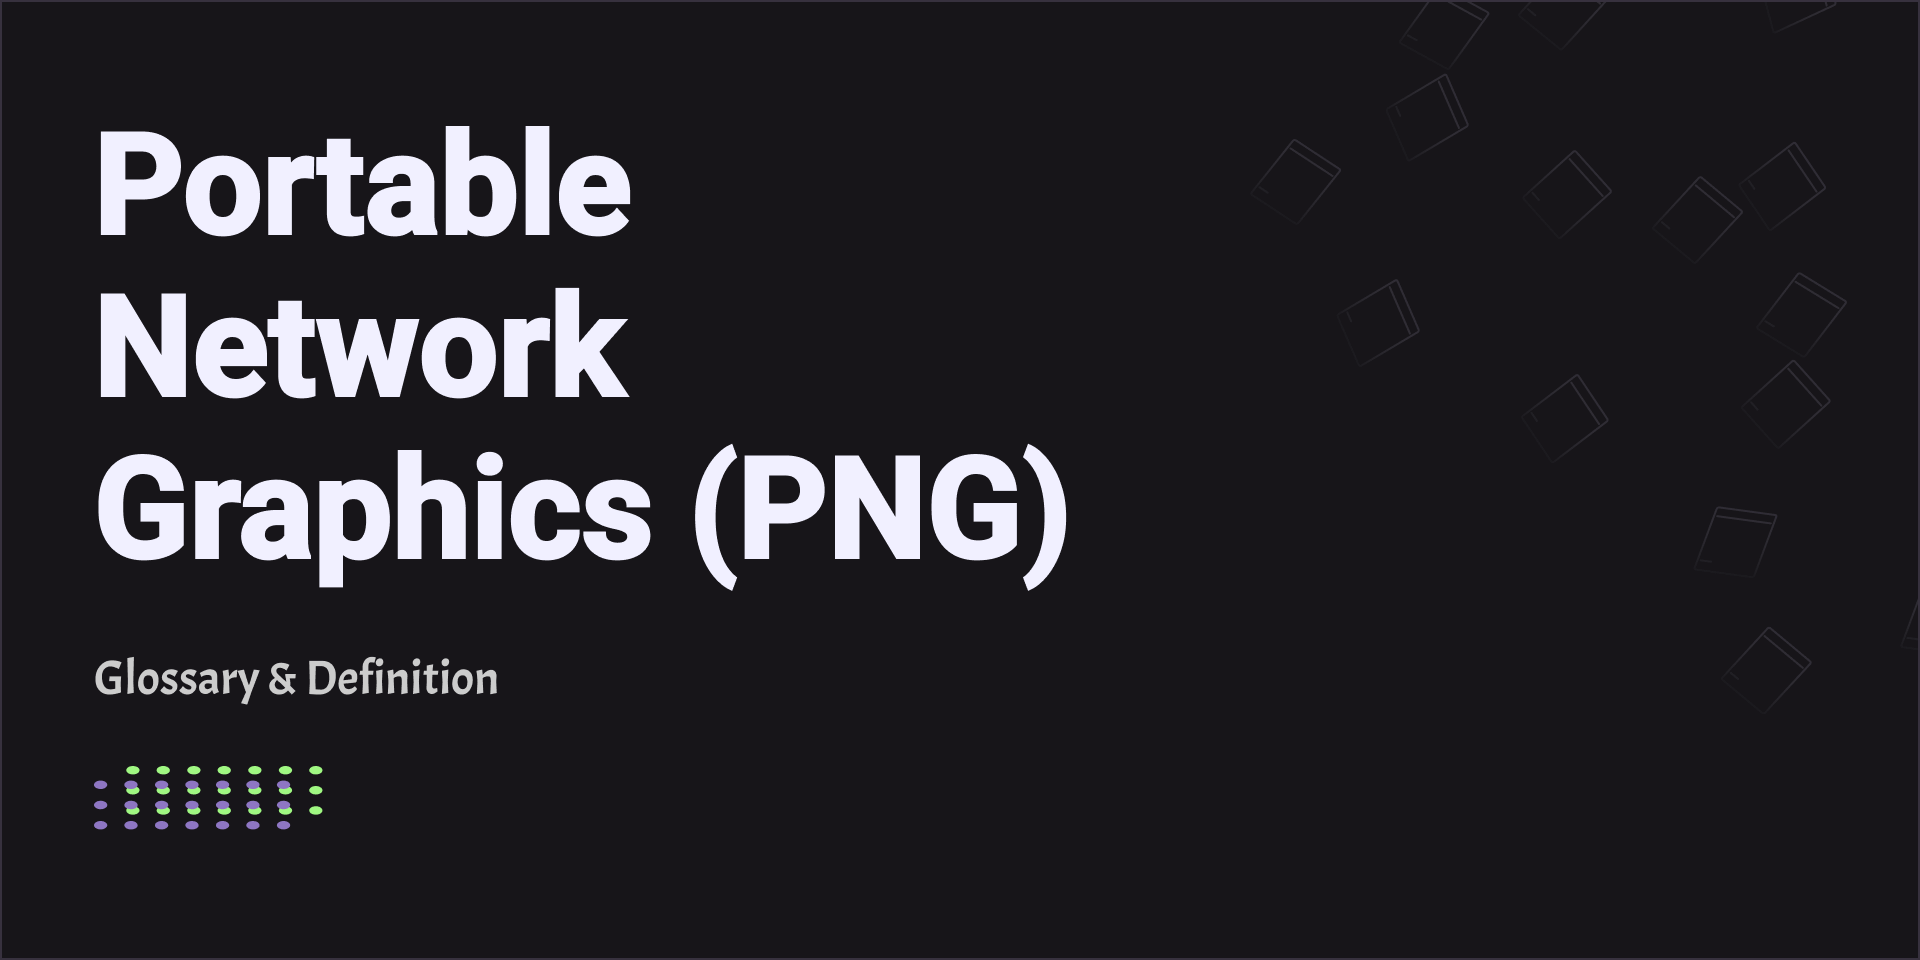 Portable Network Graphics (PNG)